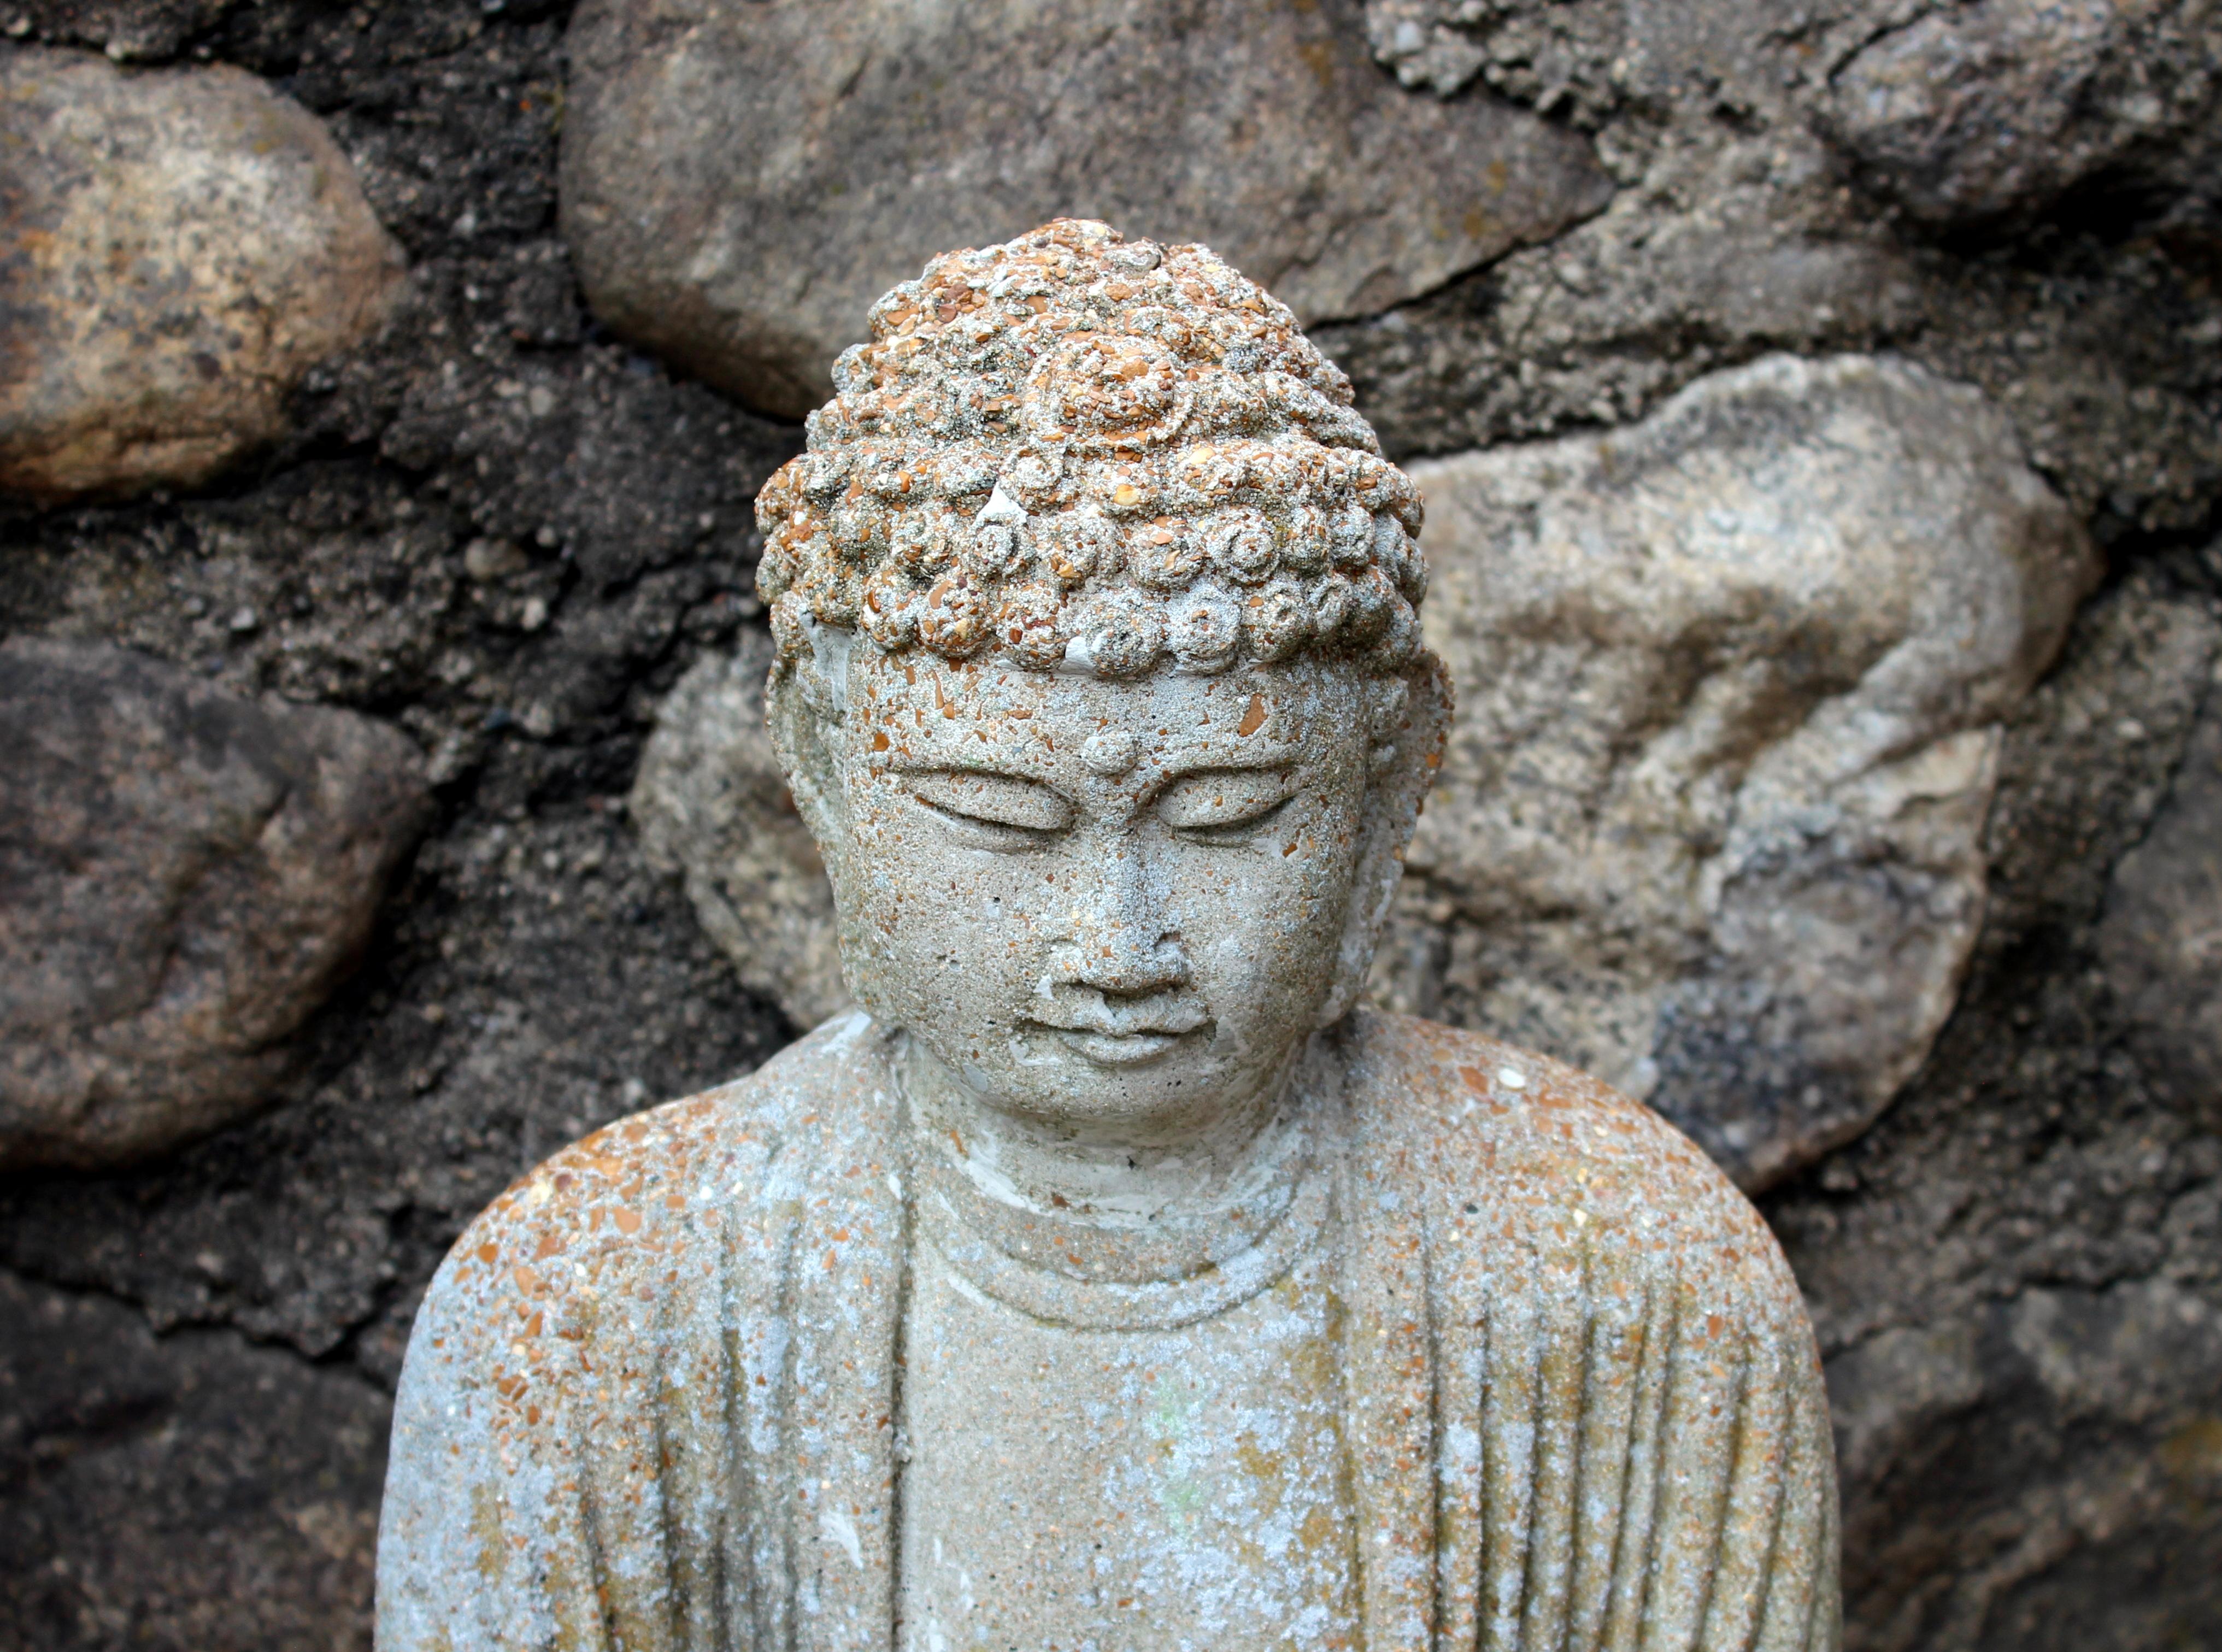 Old cement meditating Buddha, circa late 20th century. Nicely modeled in meditation pose with serene expression. Has some nice lichen and patina. Measures: 19